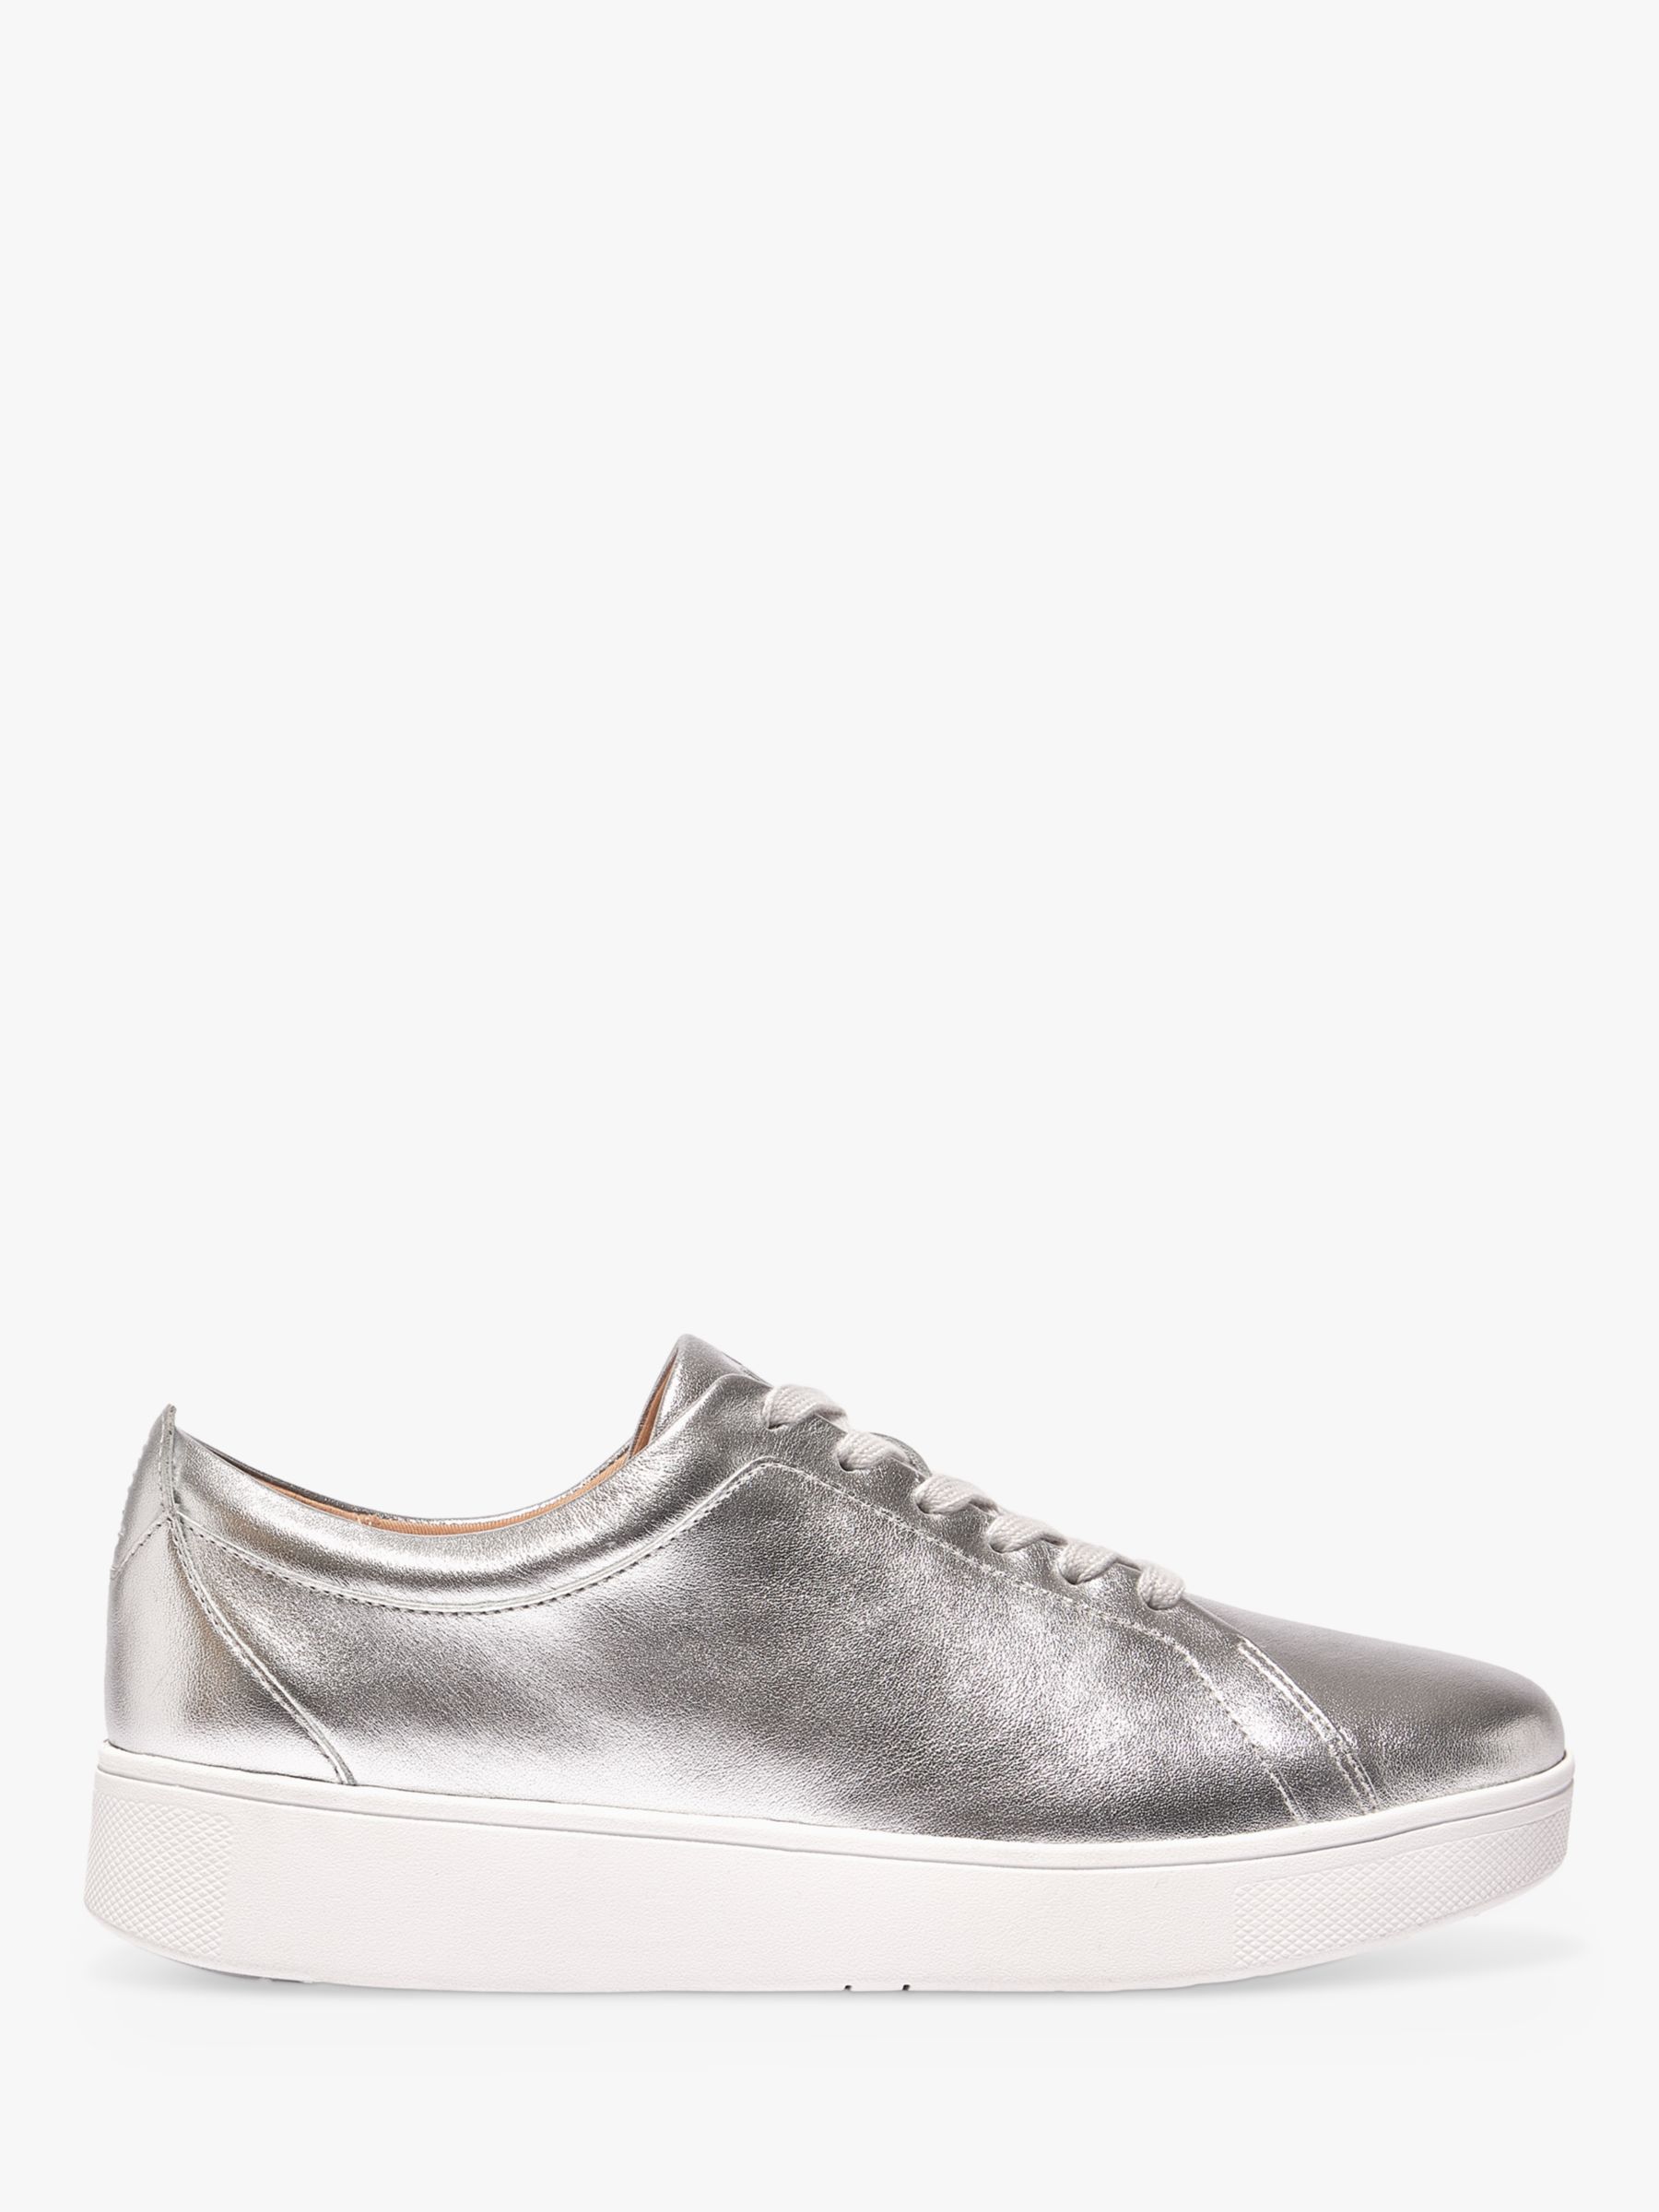 FitFlop Rally Lace Up Leather Trainers, Silver at John Lewis & Partners